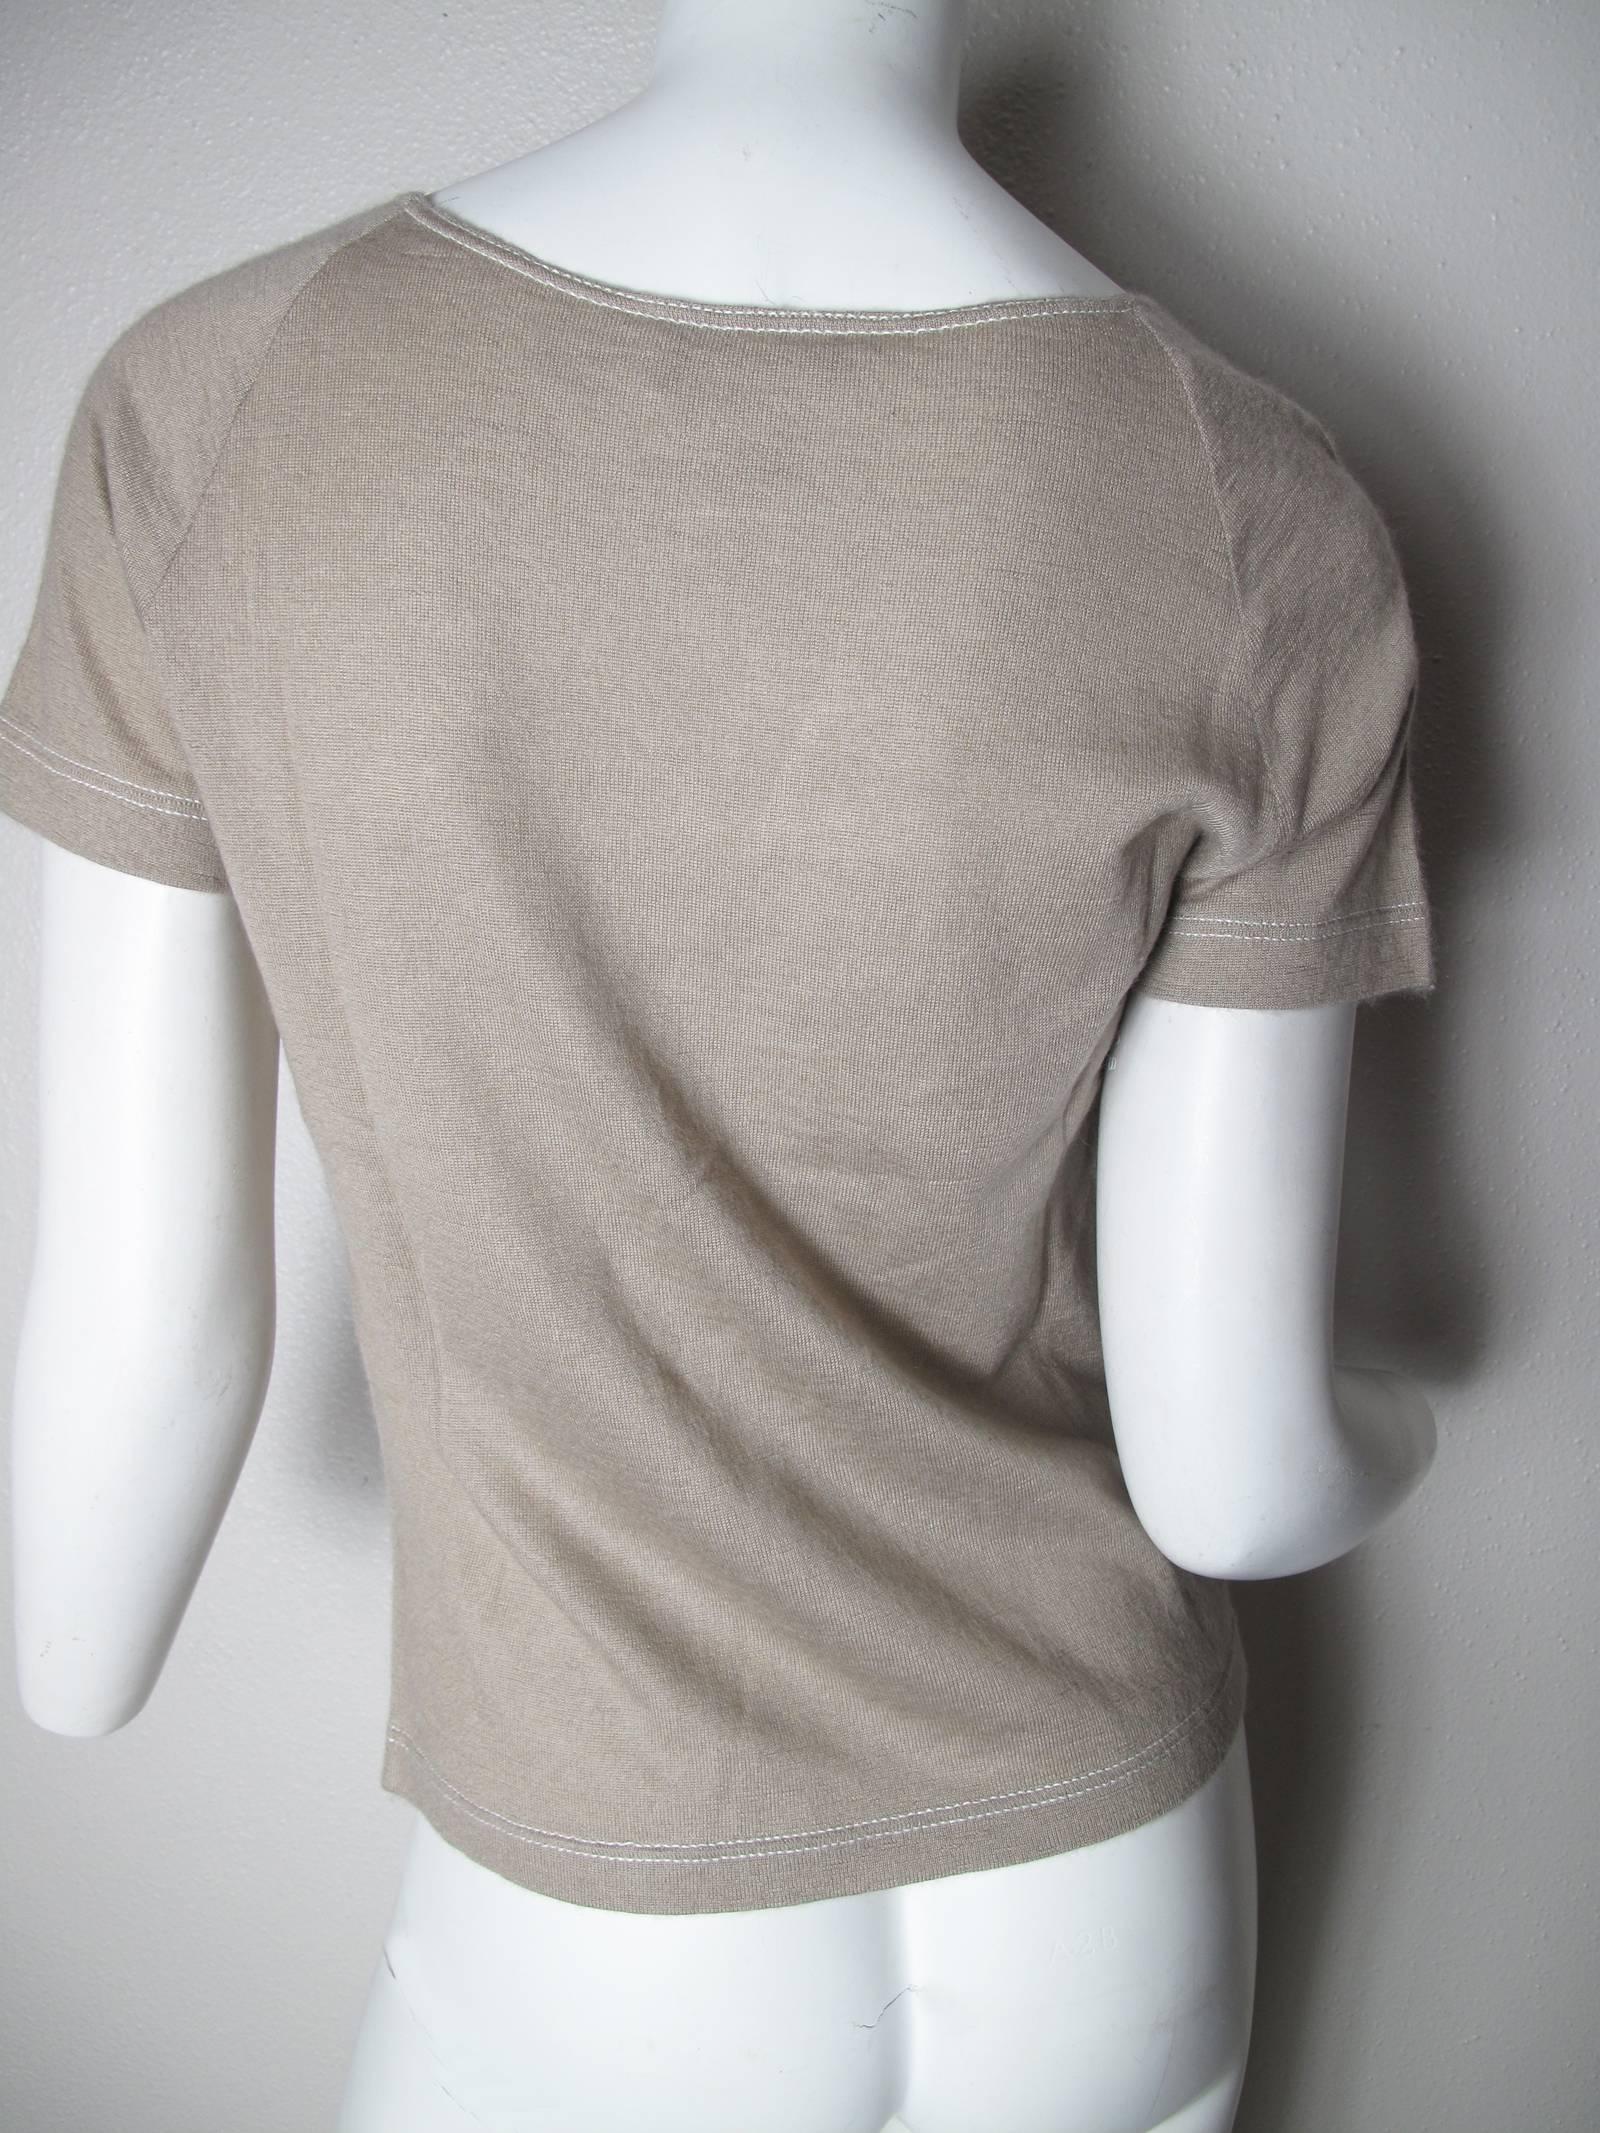 Chanel beige cashmere/ silk "t-shirt" short sleeve with white stitching at neck, bottom and sleeves.  Circa 2000. Condition: Excellent. Size 40

We accept returns for refund, please see our terms.  We offer free ground shipping within